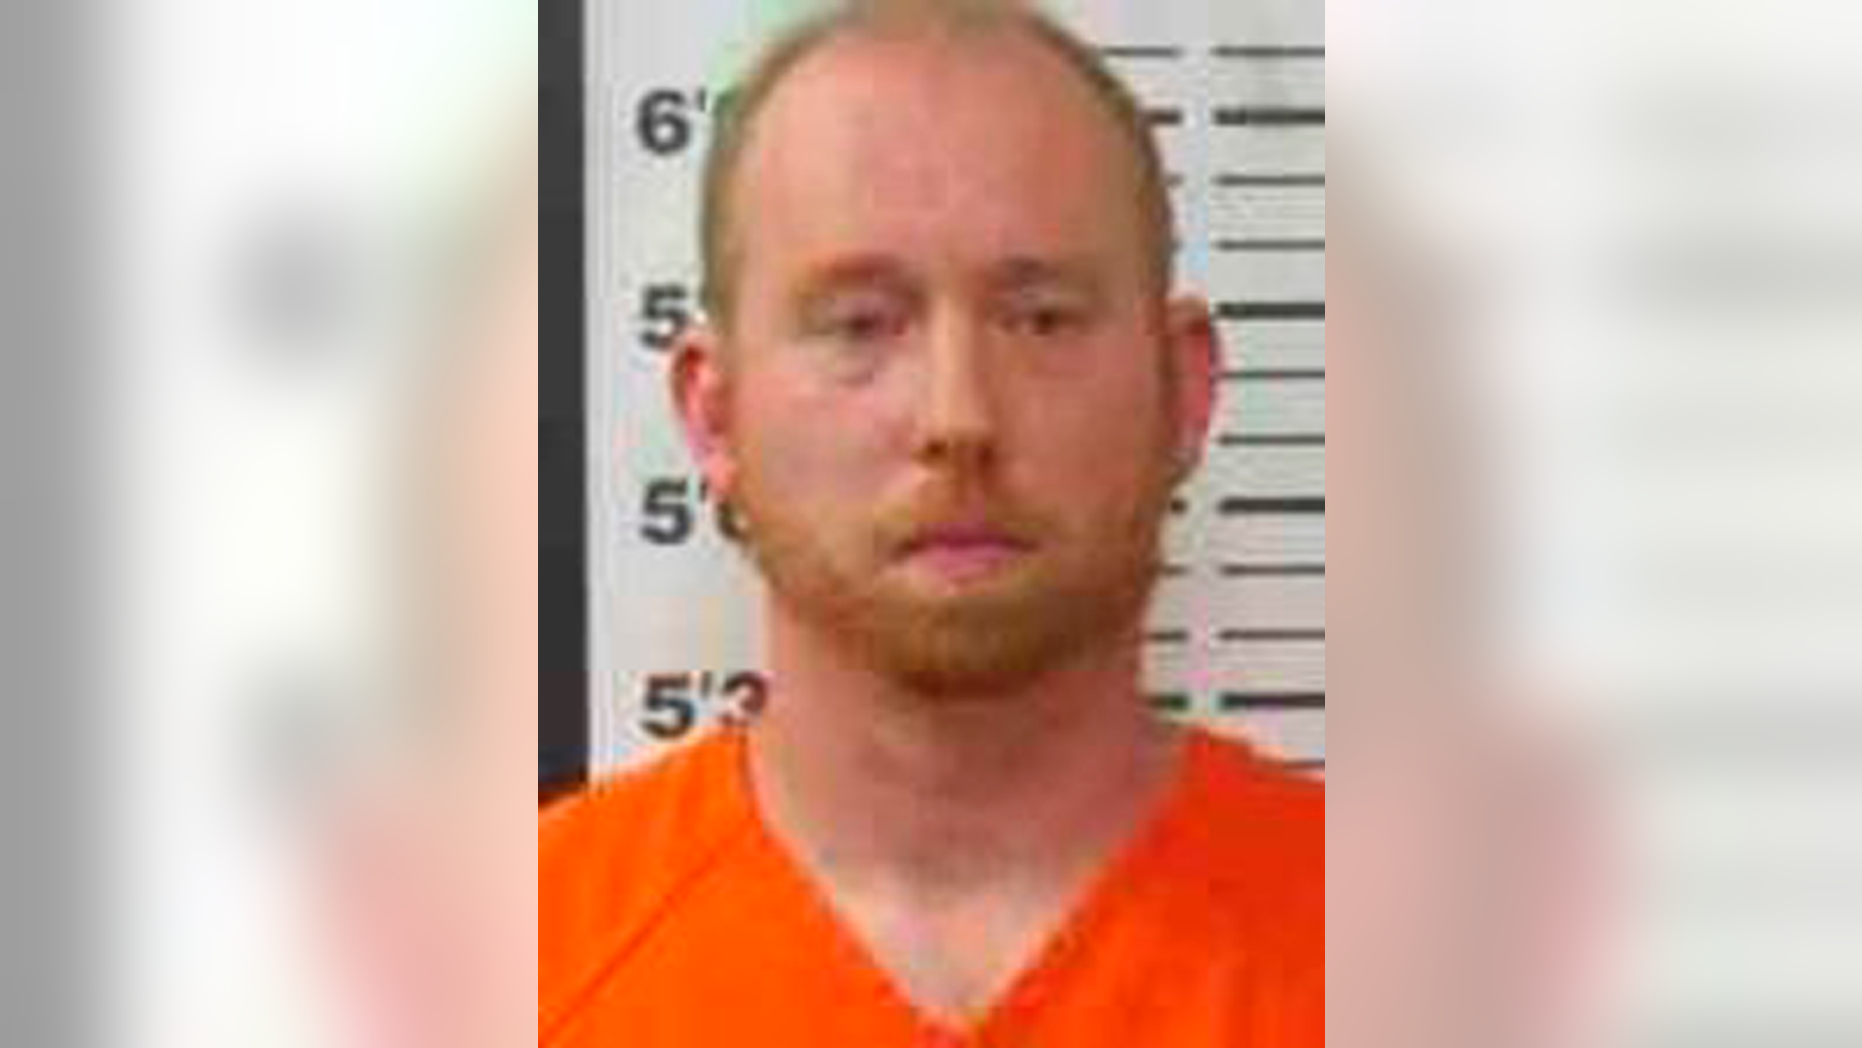 This undated photo from the North Dakota Automated Victim Notification and Information Program in the North State shows Chad Isaak. On Friday, April 5, 2019, a chiropractor suspected of killing four people in a North Dakota property management company must appear in court. Isaak is jailed after his arrest Thursday for killing the business owner and three employees in Mandan. (Automated Victim Information and Victim Notification Program for North Dakota via AP)